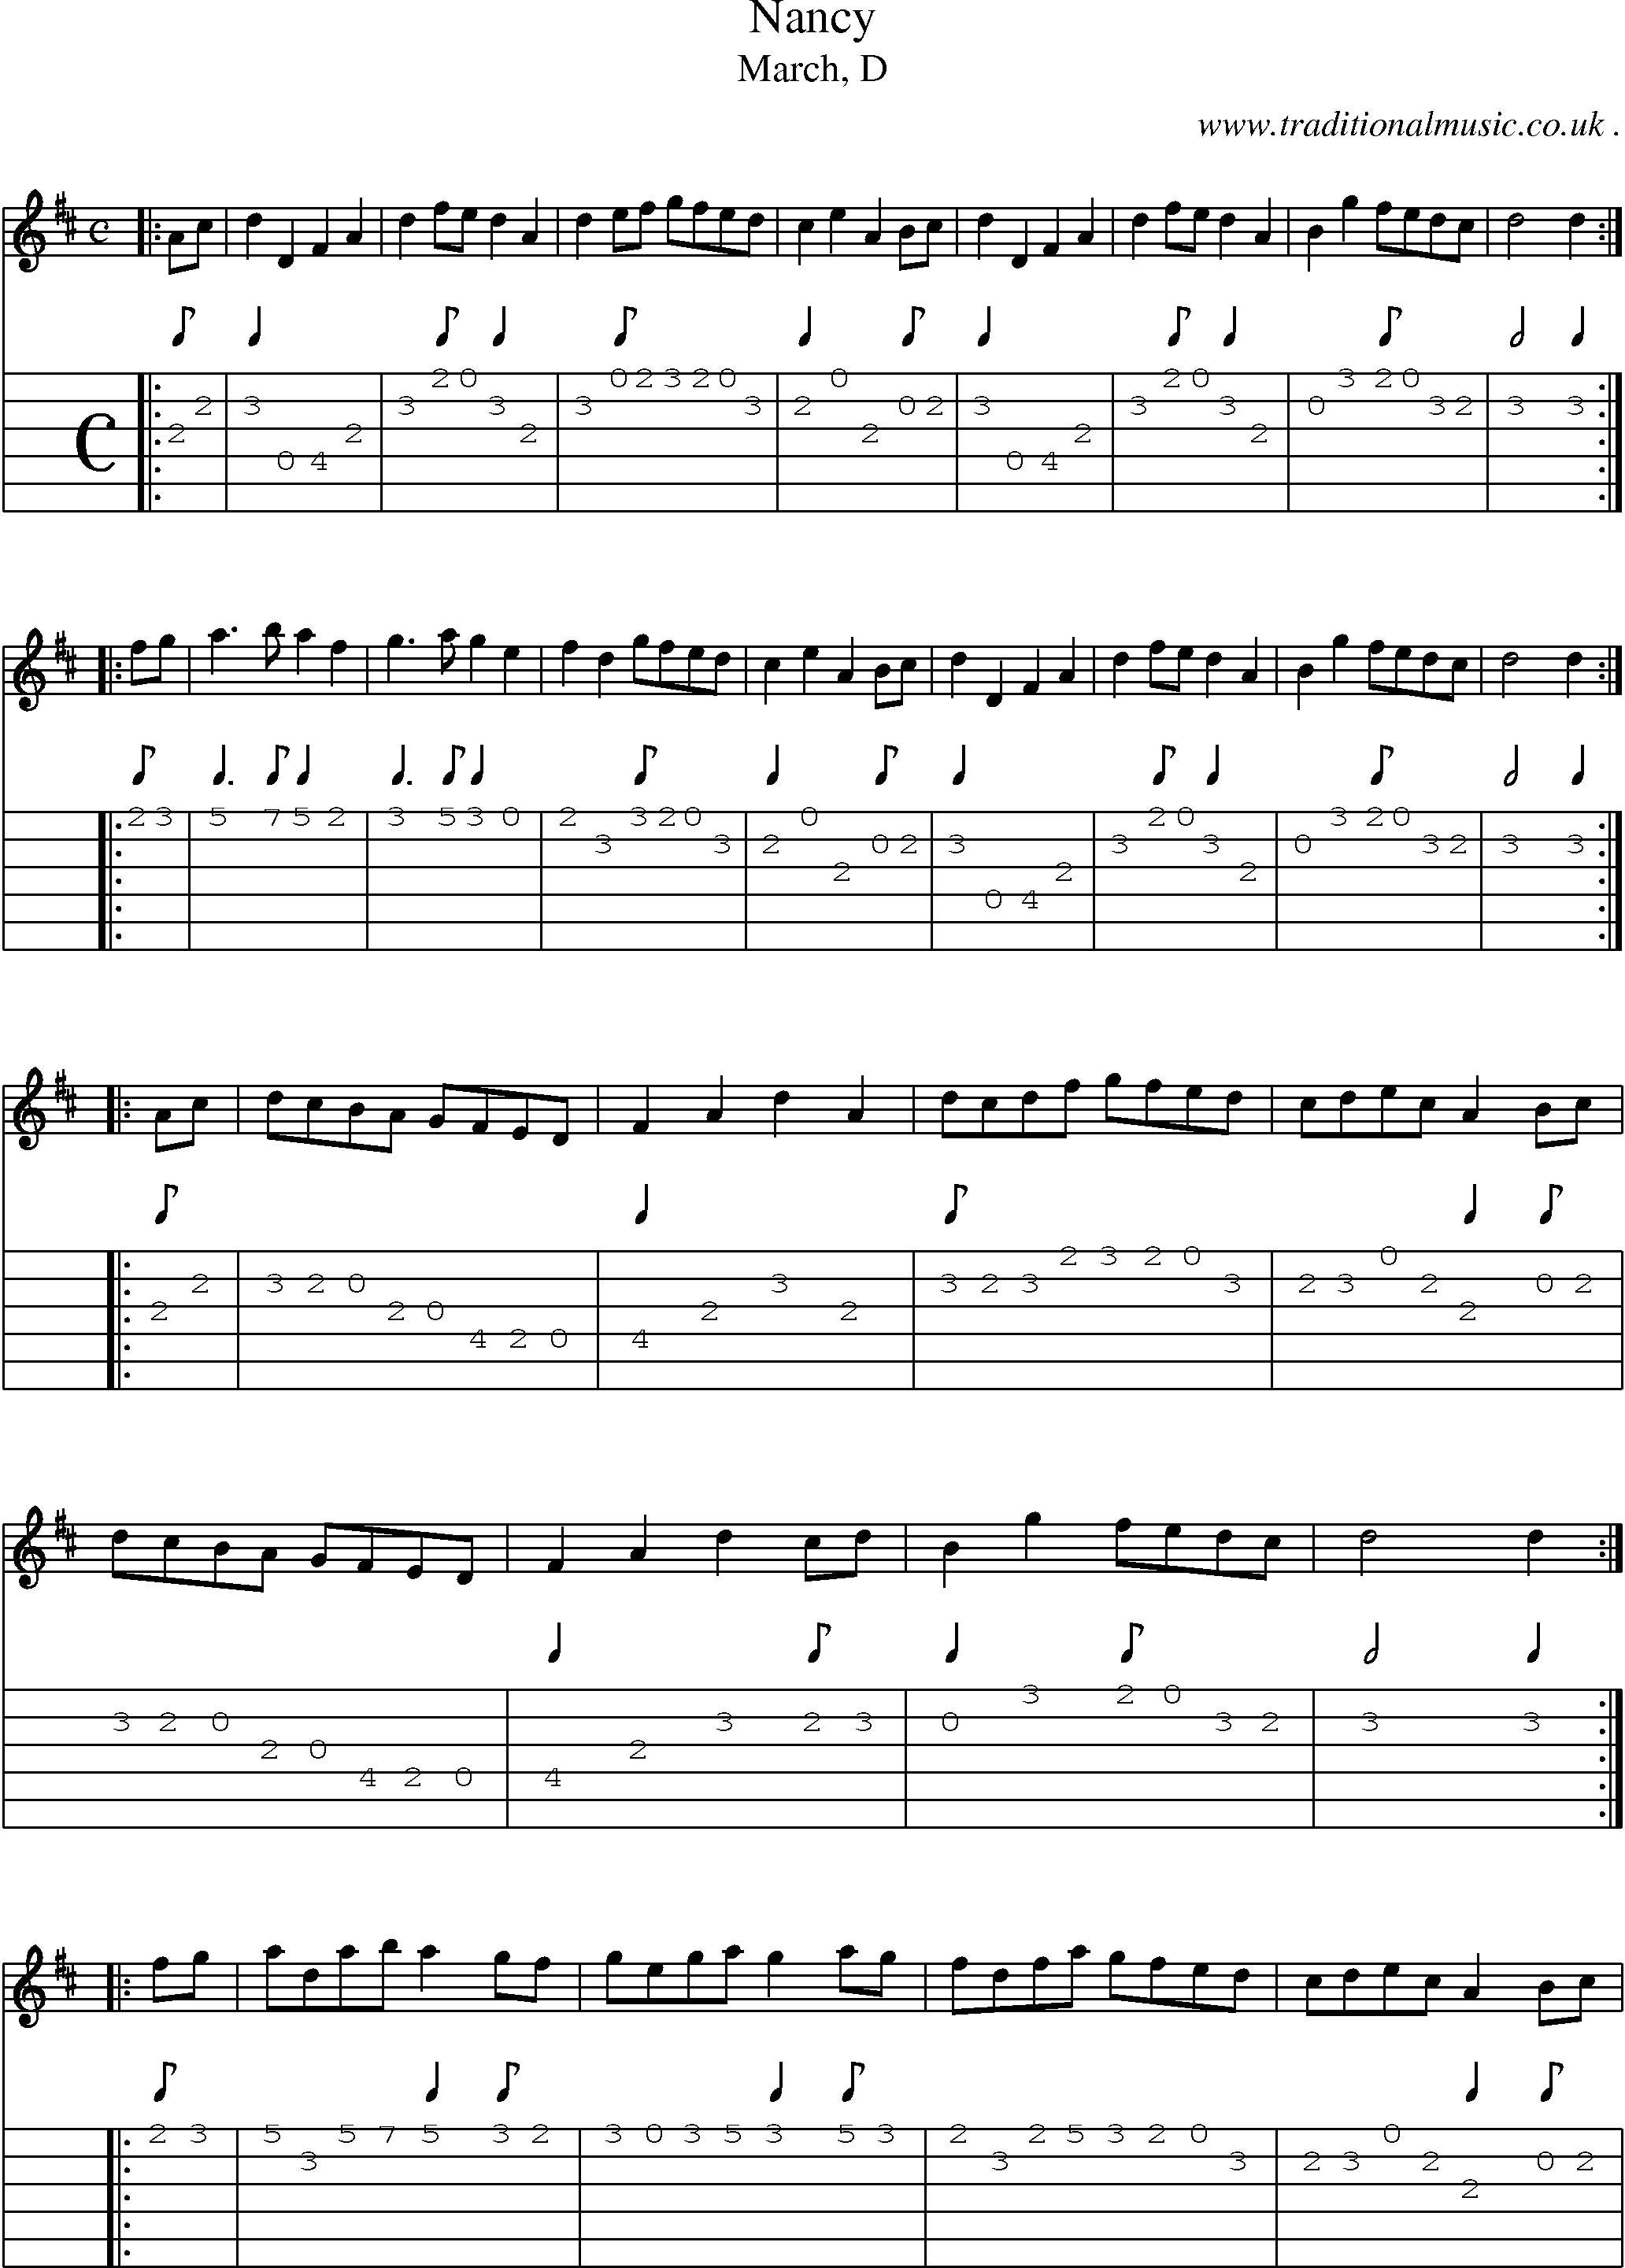 Sheet-music  score, Chords and Guitar Tabs for Nancy